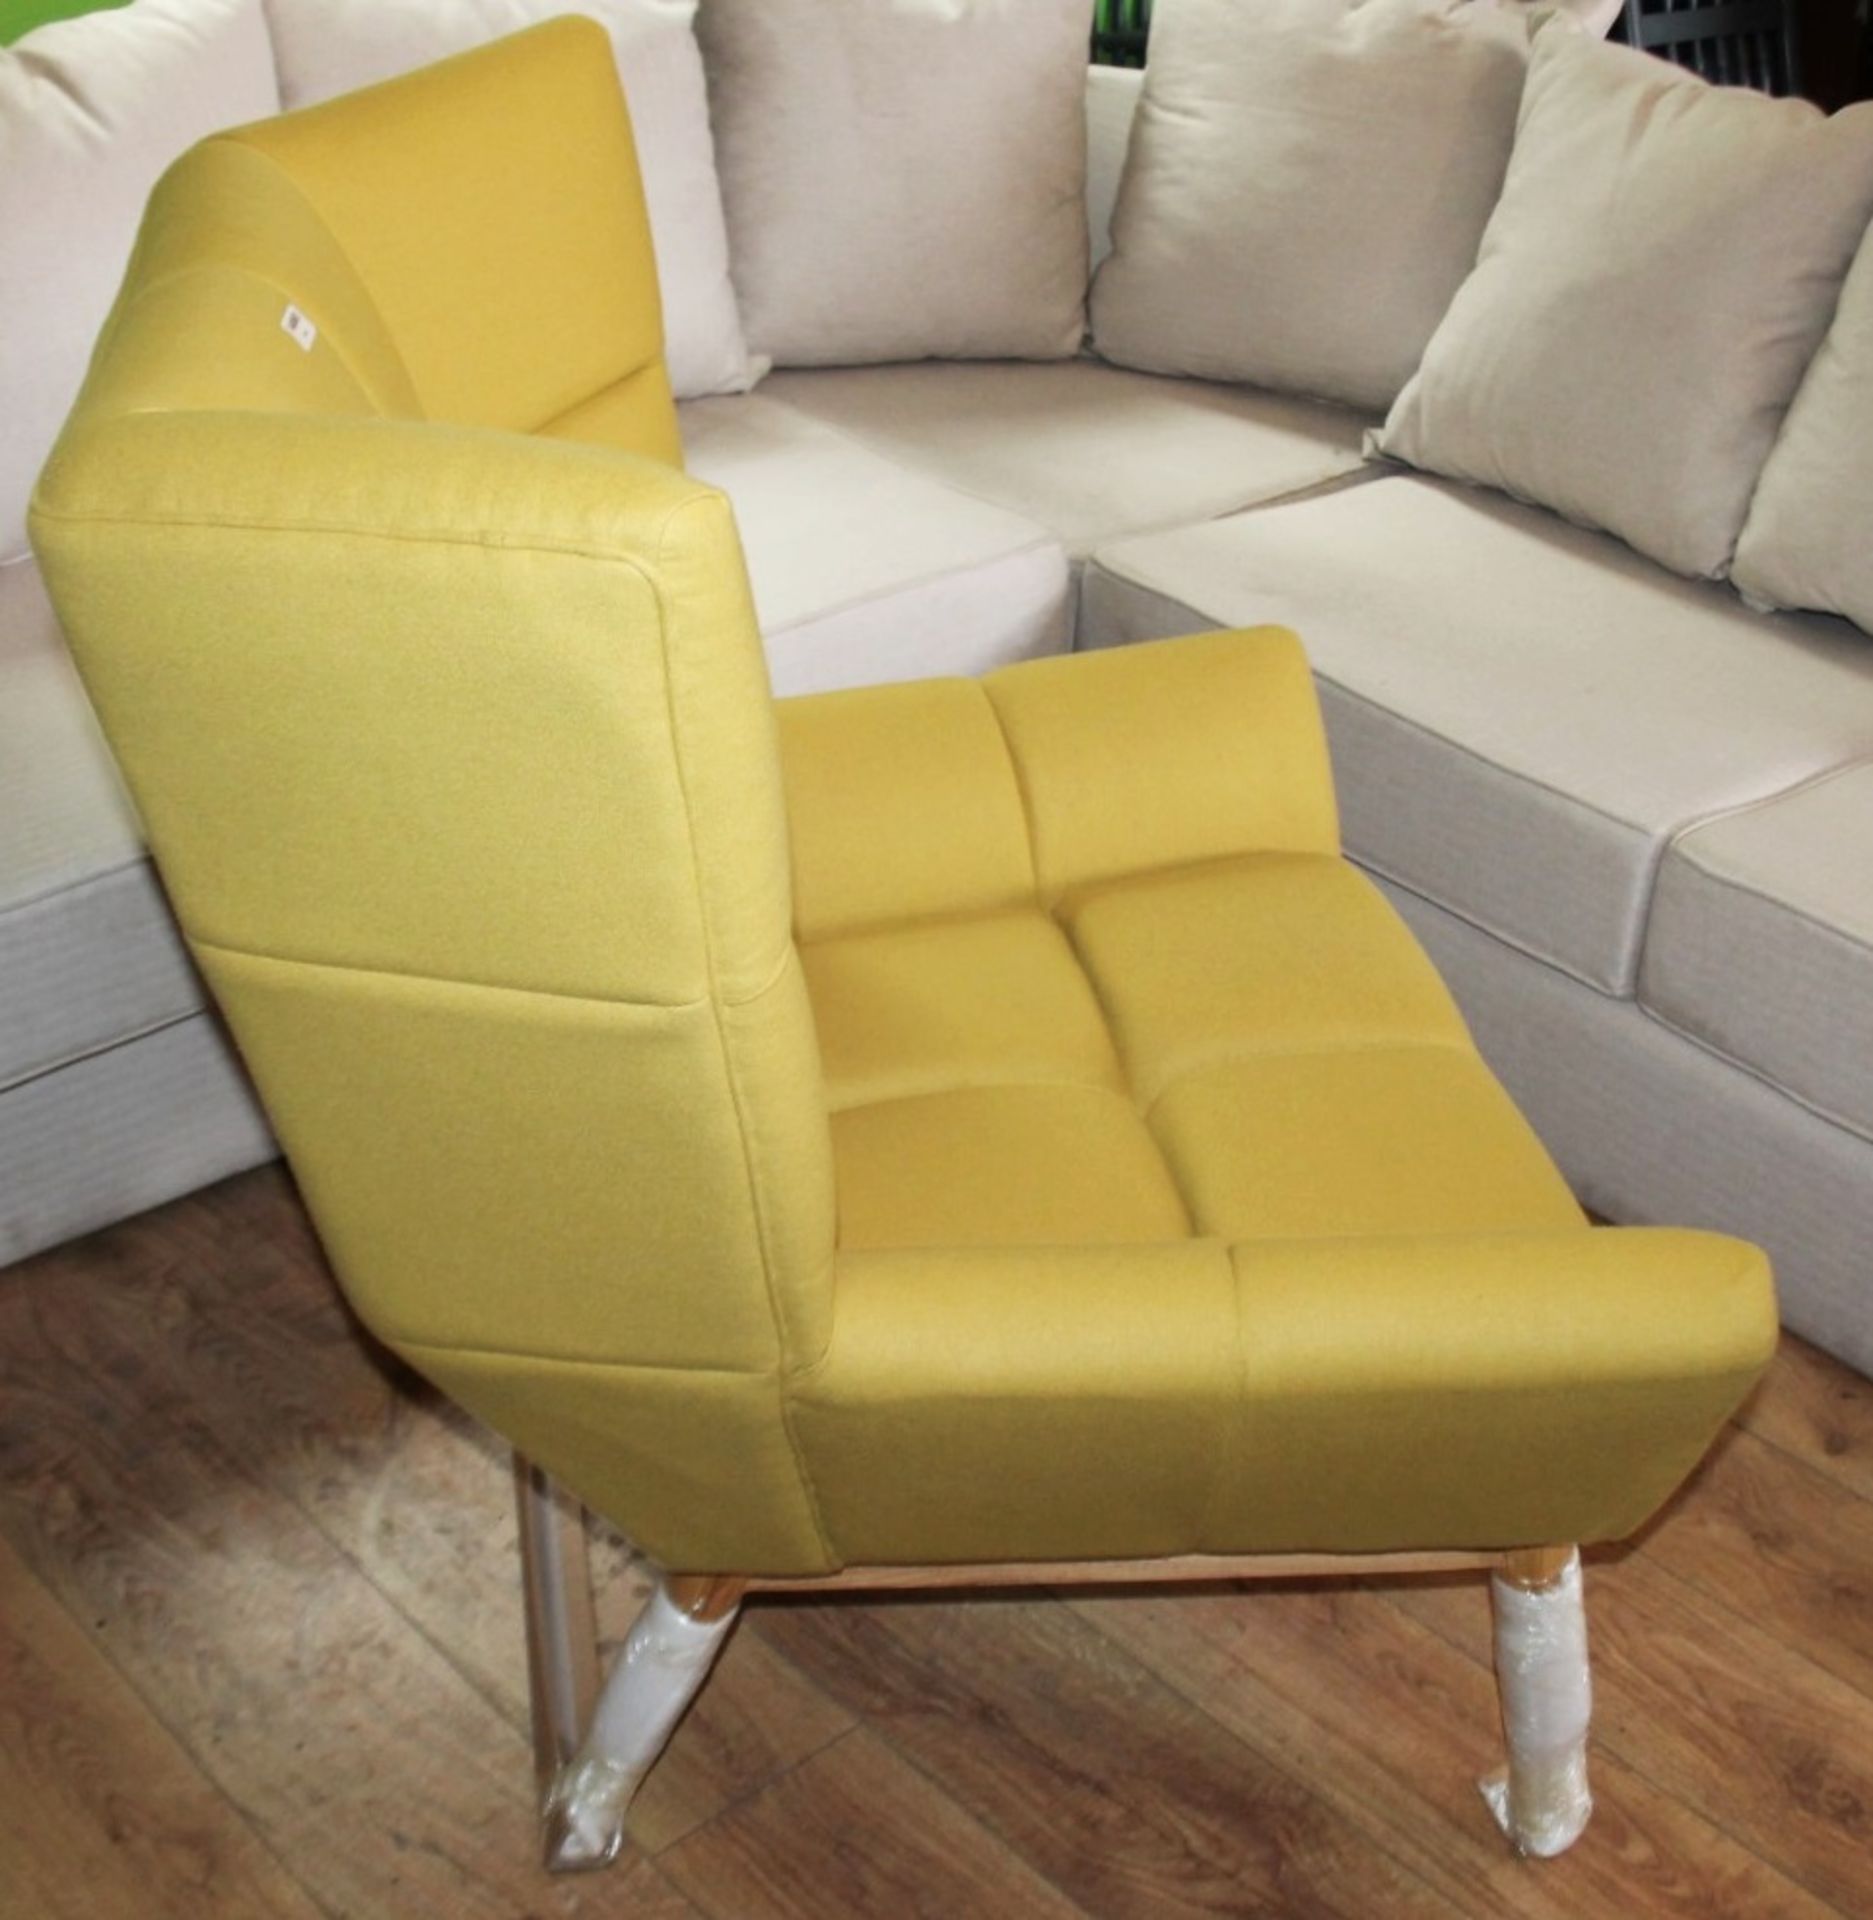 1 x Cashmere 'BLOCK' Upholstered Mid Century-Inspired Designer Lounge Chair - New Stock - Image 2 of 5